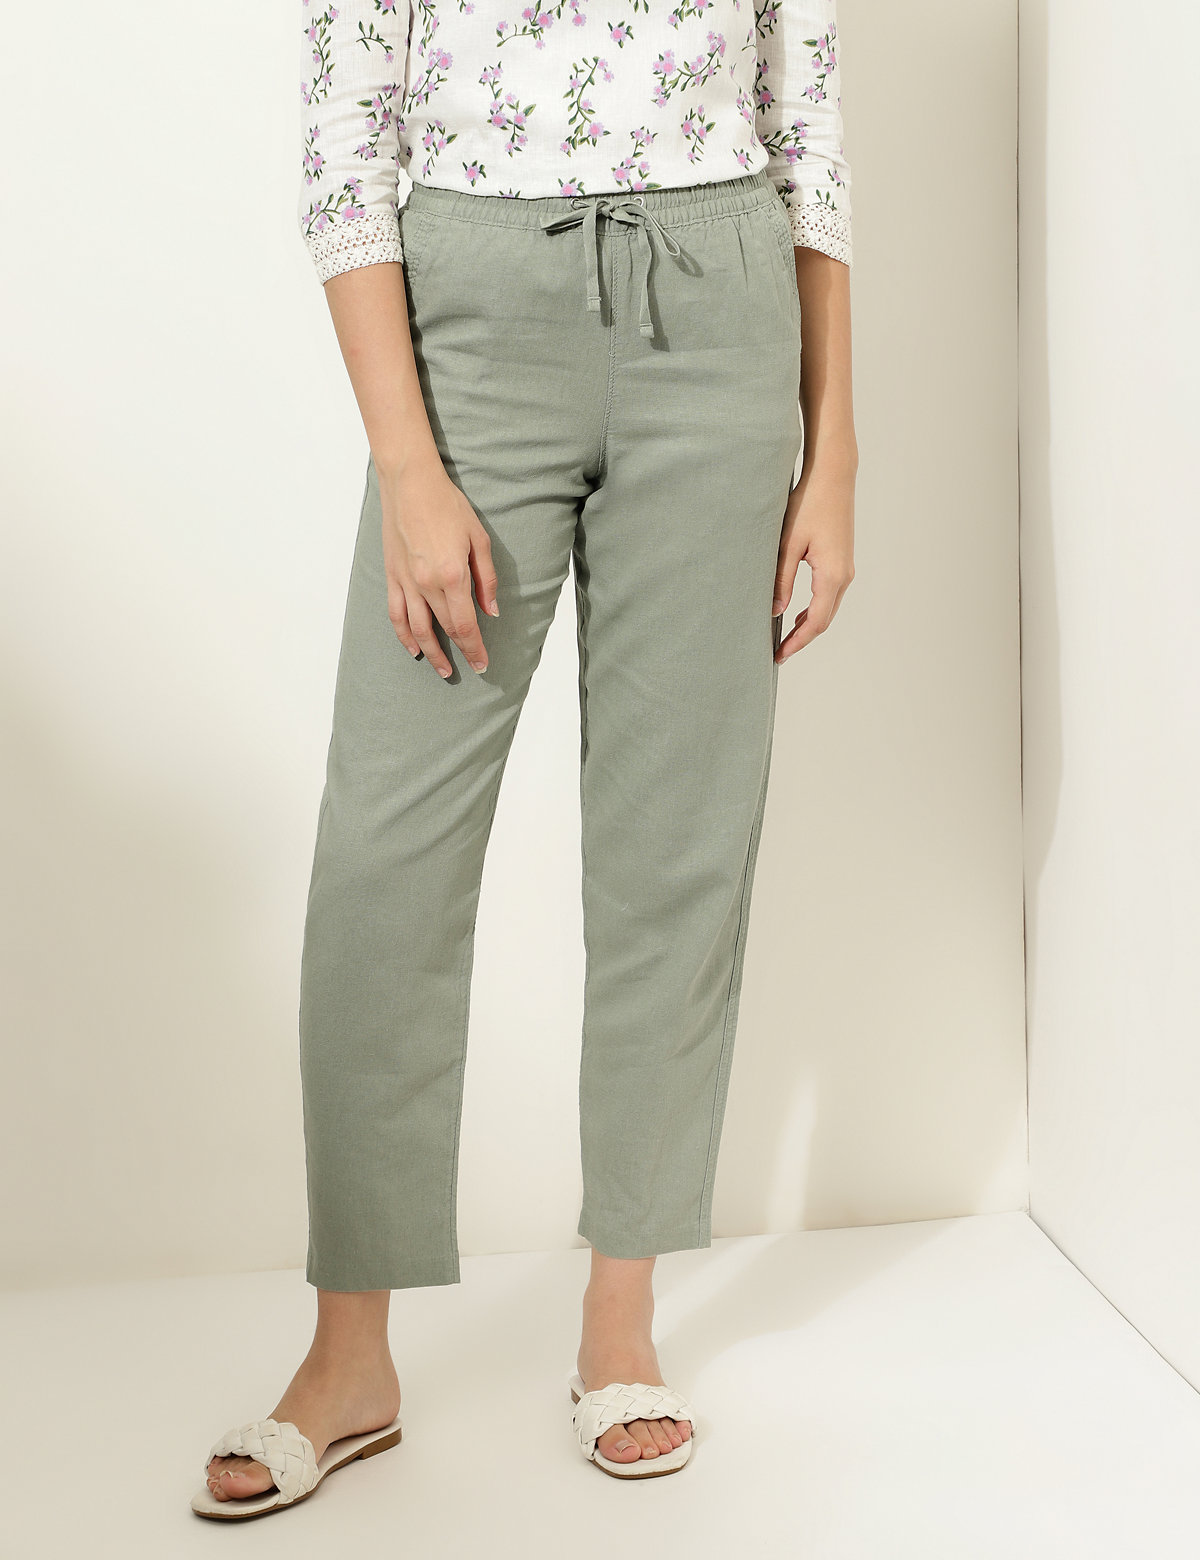 Flax Linen Mix Plain Tapered Fit Trousers